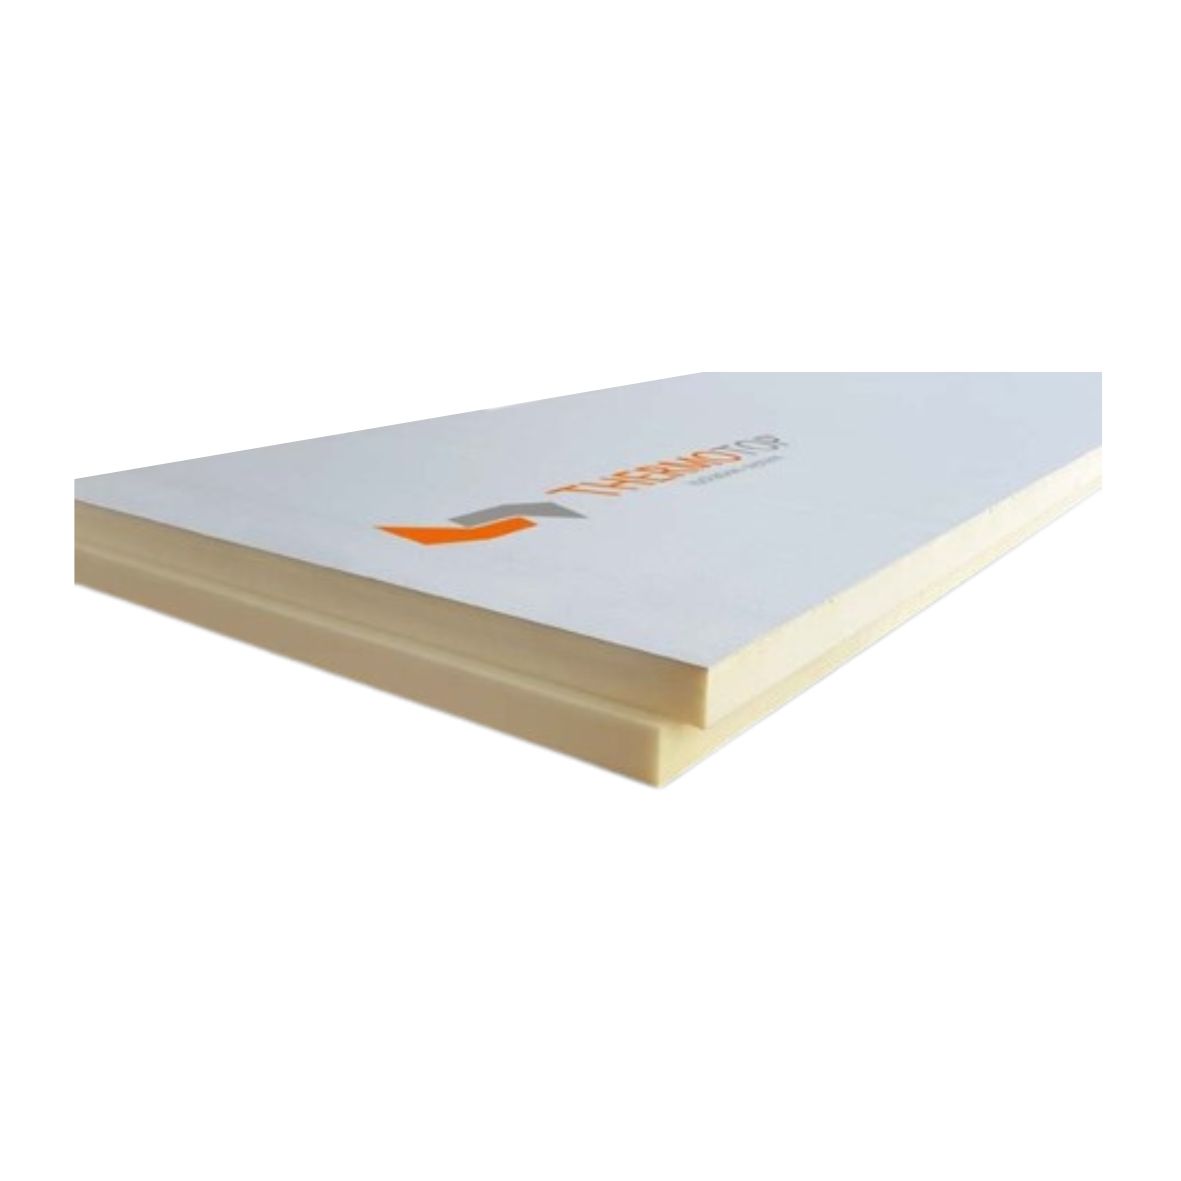 PIR Thermal insulation boards - Thermotop Toboard PIR BV-BV thermal insulation board 150 x 1200 x 2400 mm, https:maxbau.ro